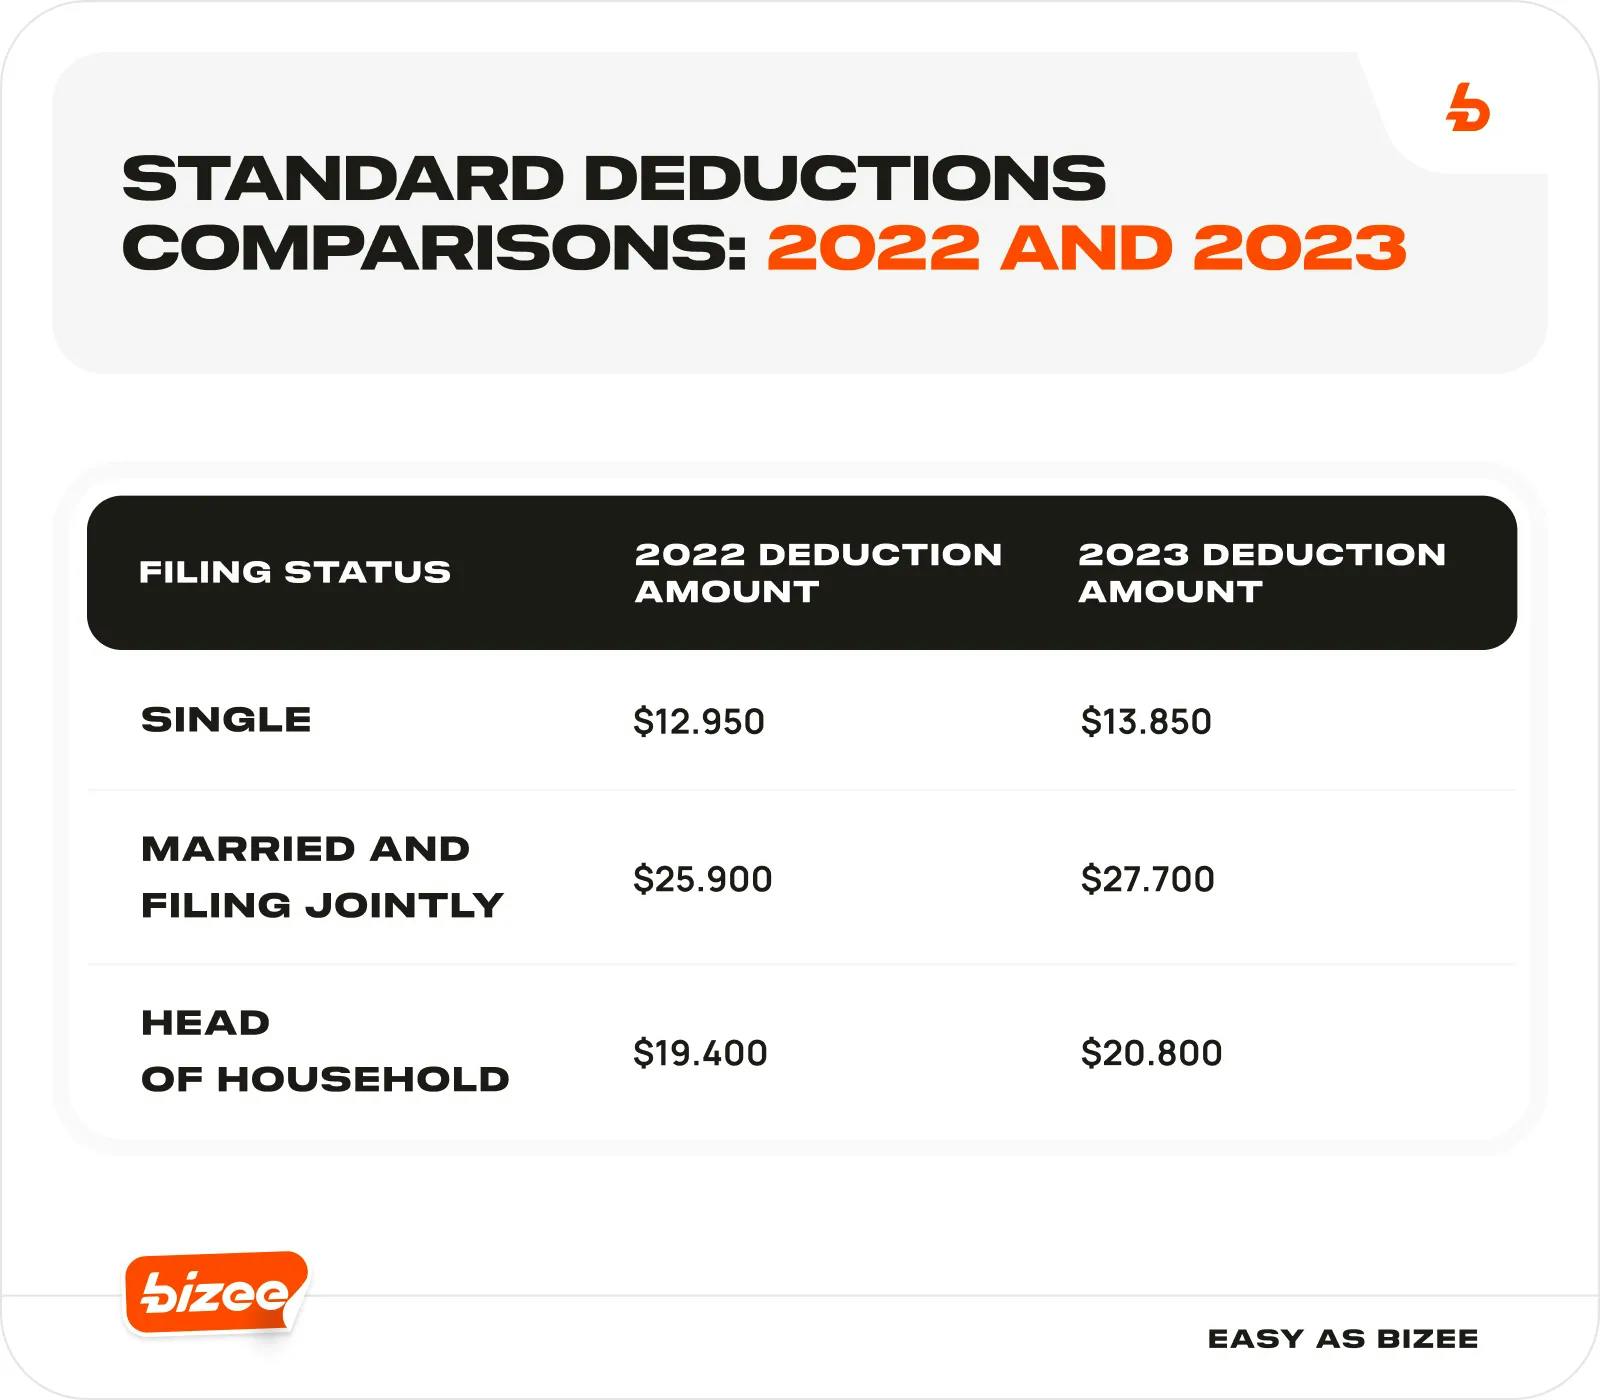 Standard Deductions Comparisons_ 2022 and 2023